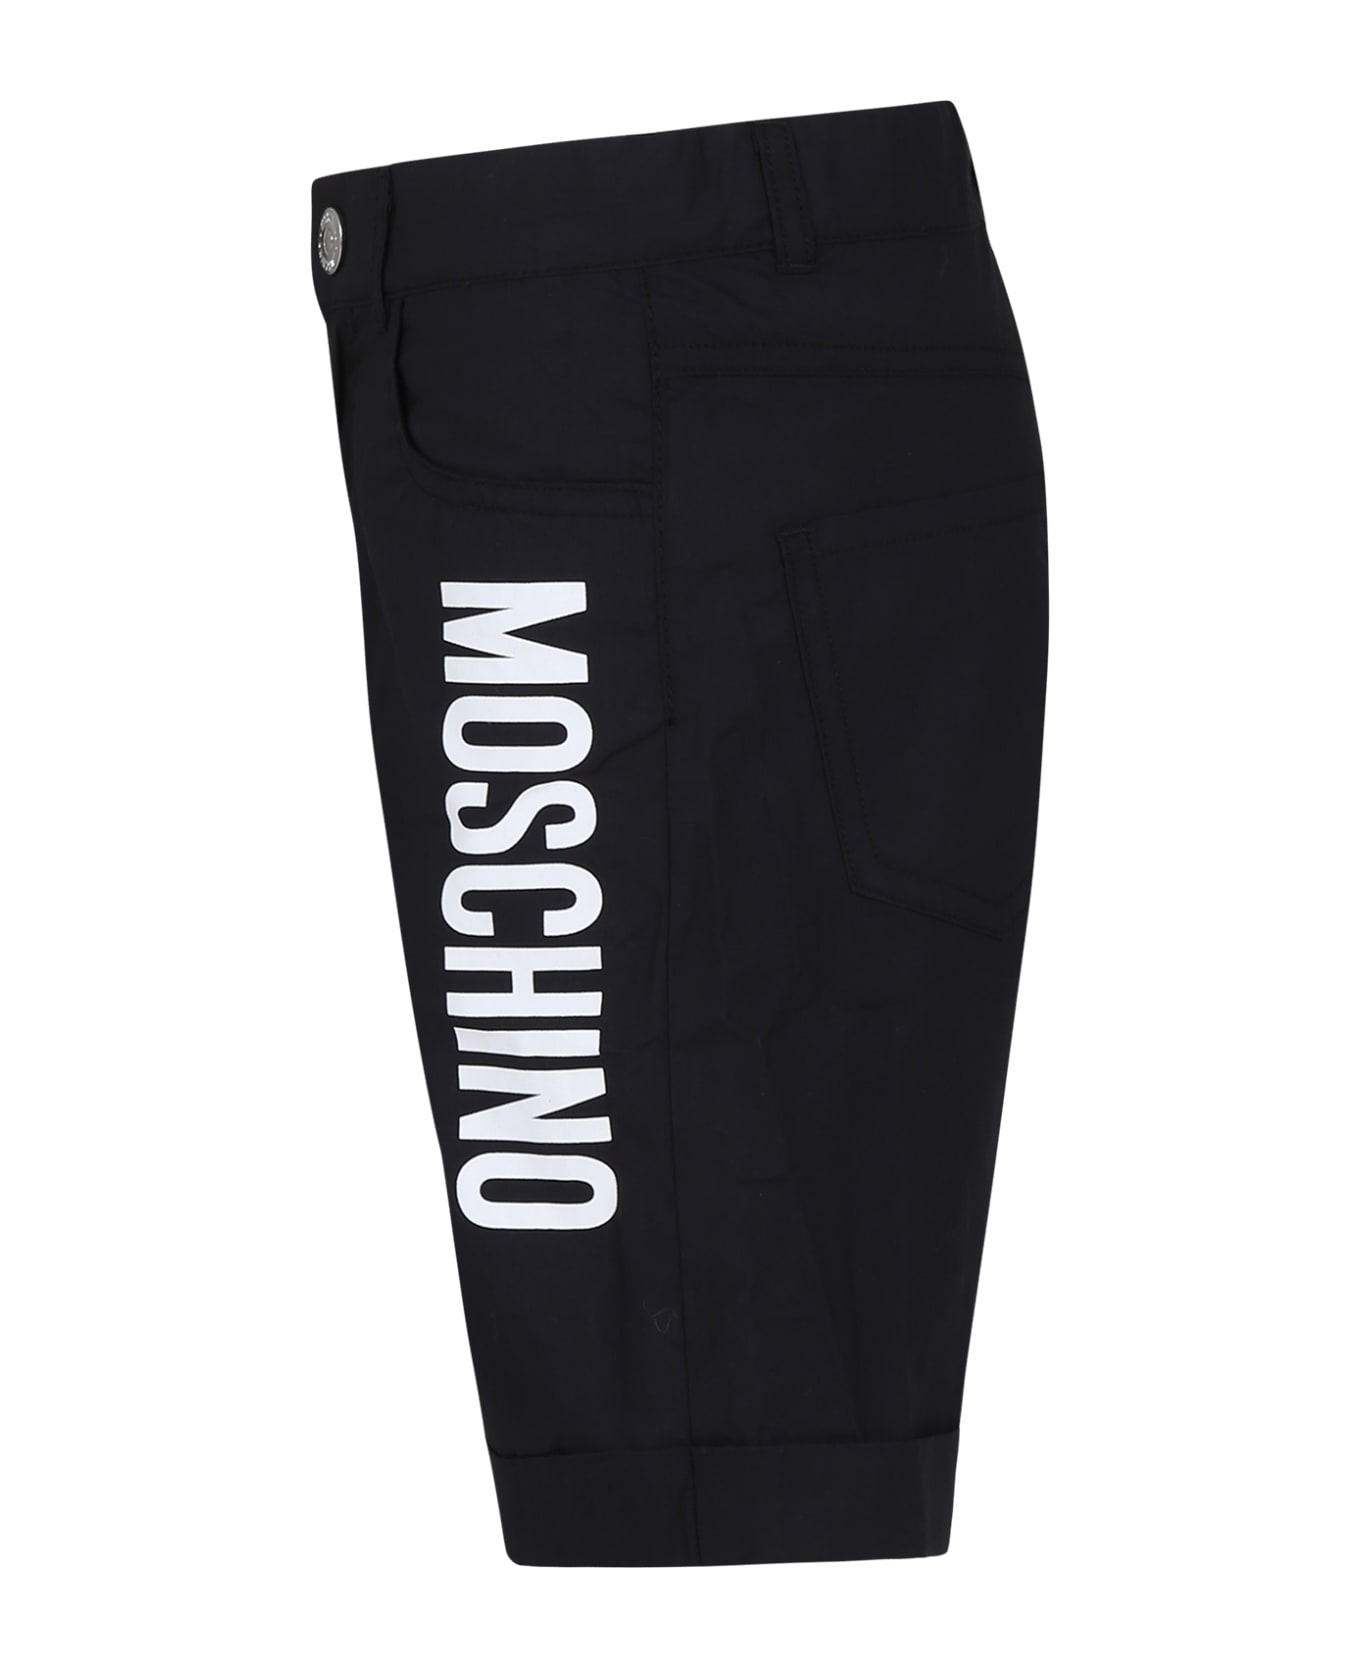 Moschino Black Shorts For Kids With Logo - Black ボトムス